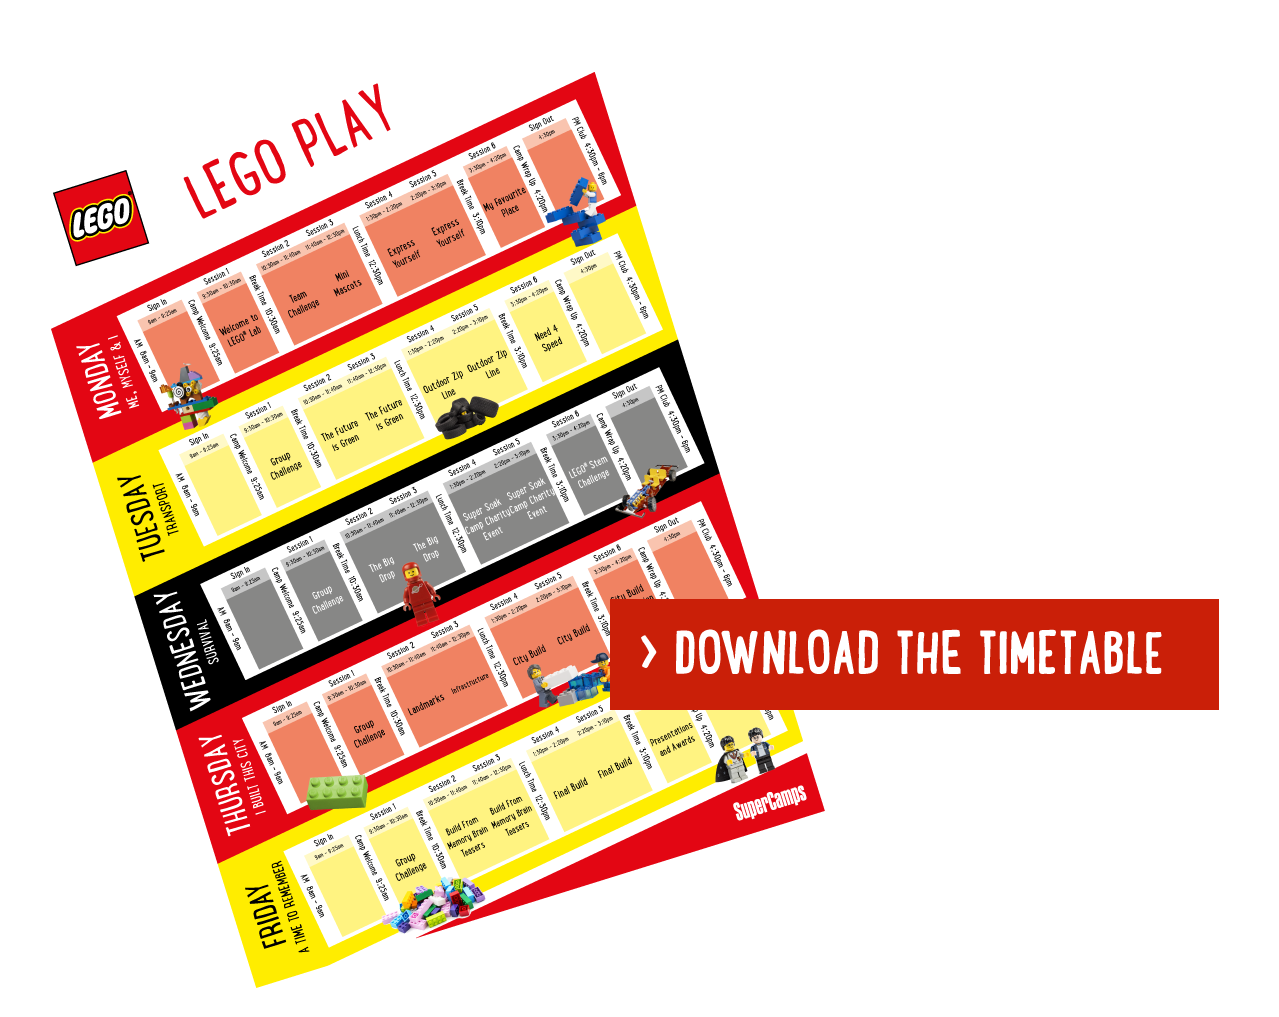 LEGO Timetable download